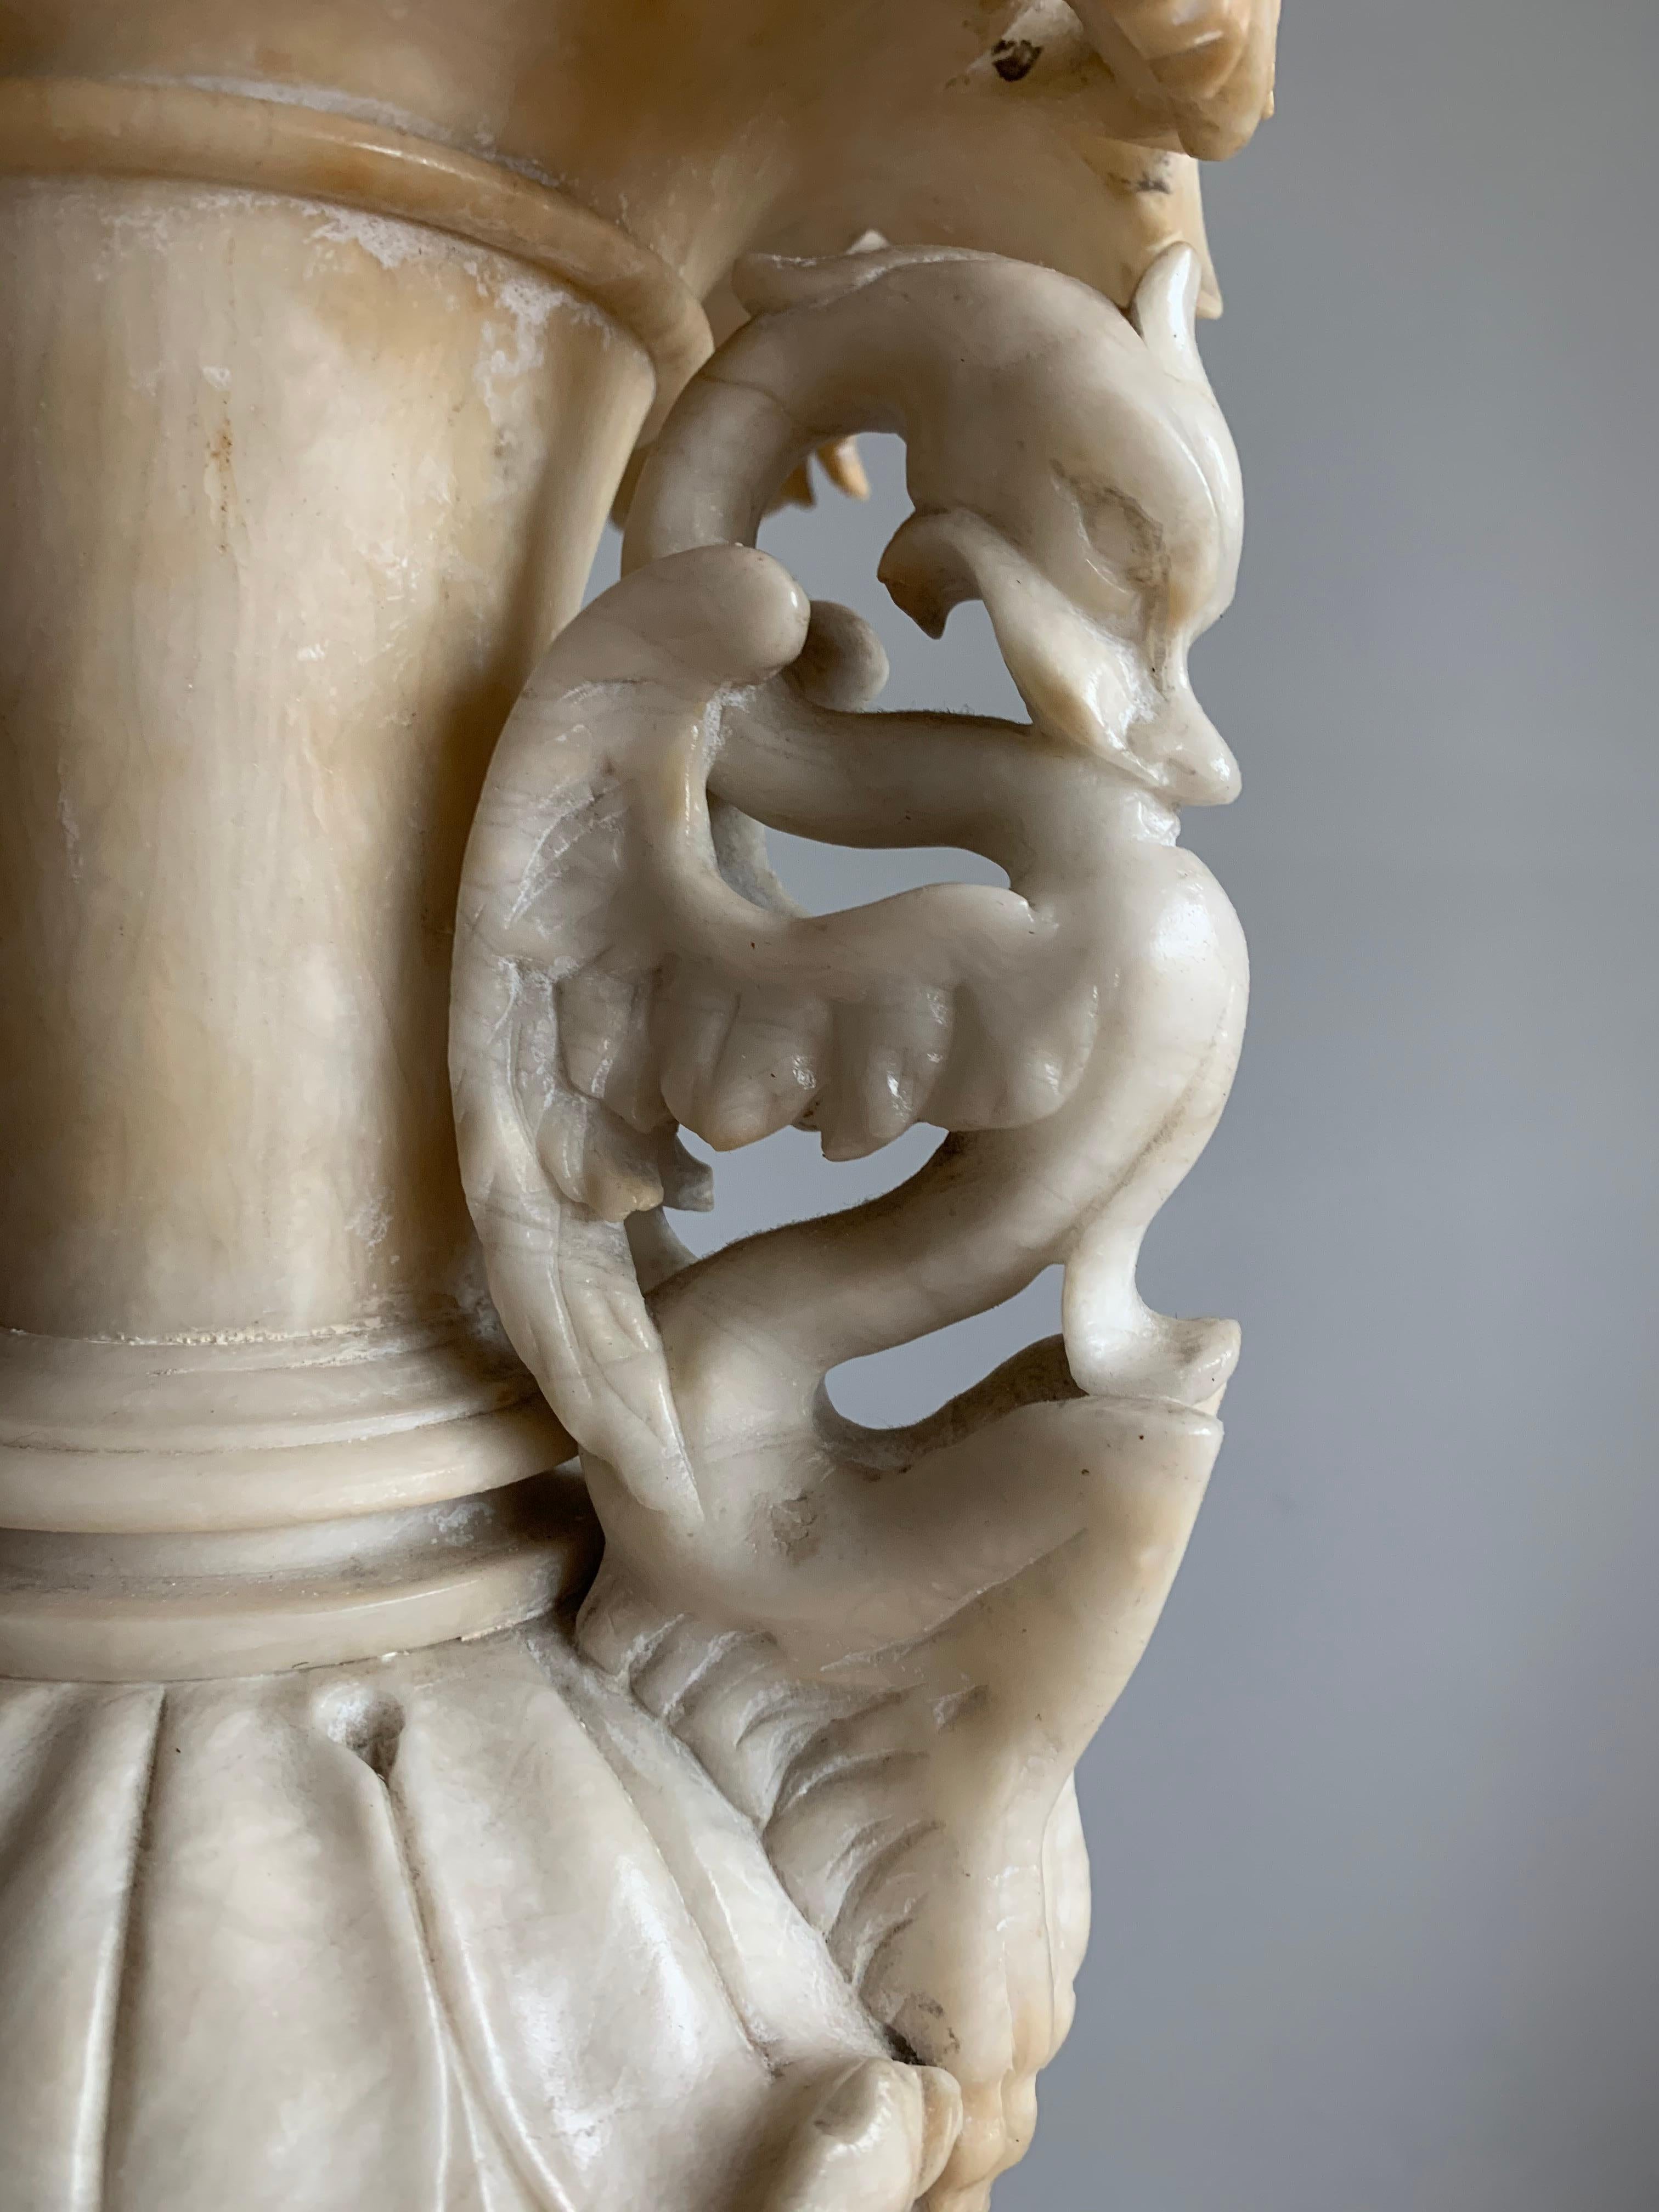 Rare and impressive work of sculptural art.

Have you ever tried to hand carve a figure out of a piece of natural mineral stone? Only than you can really come close to having an idea of how remarkable this vase is. To be able to hand carve these